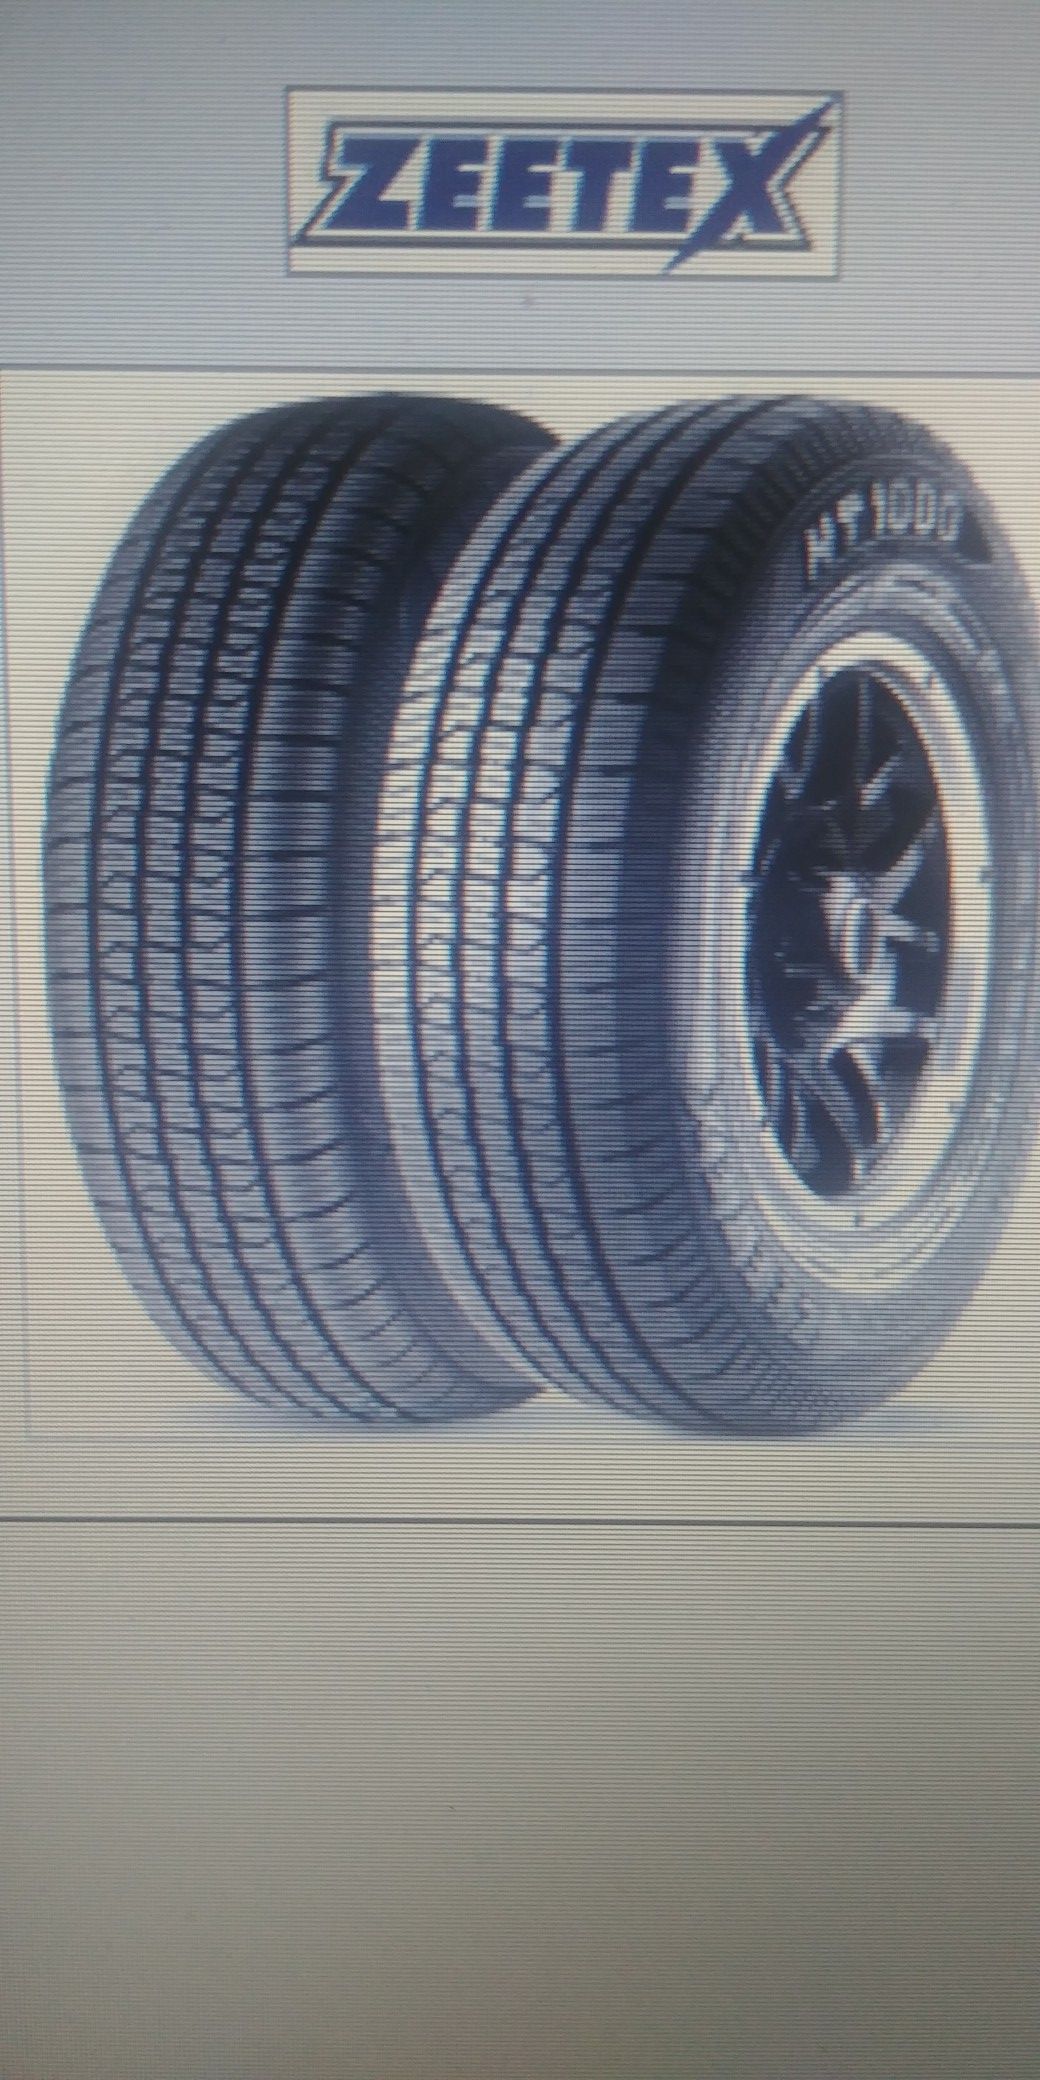 Trailer tires for sale from 25.00 call 9@5@4@@2@6@0@7@9@2@0